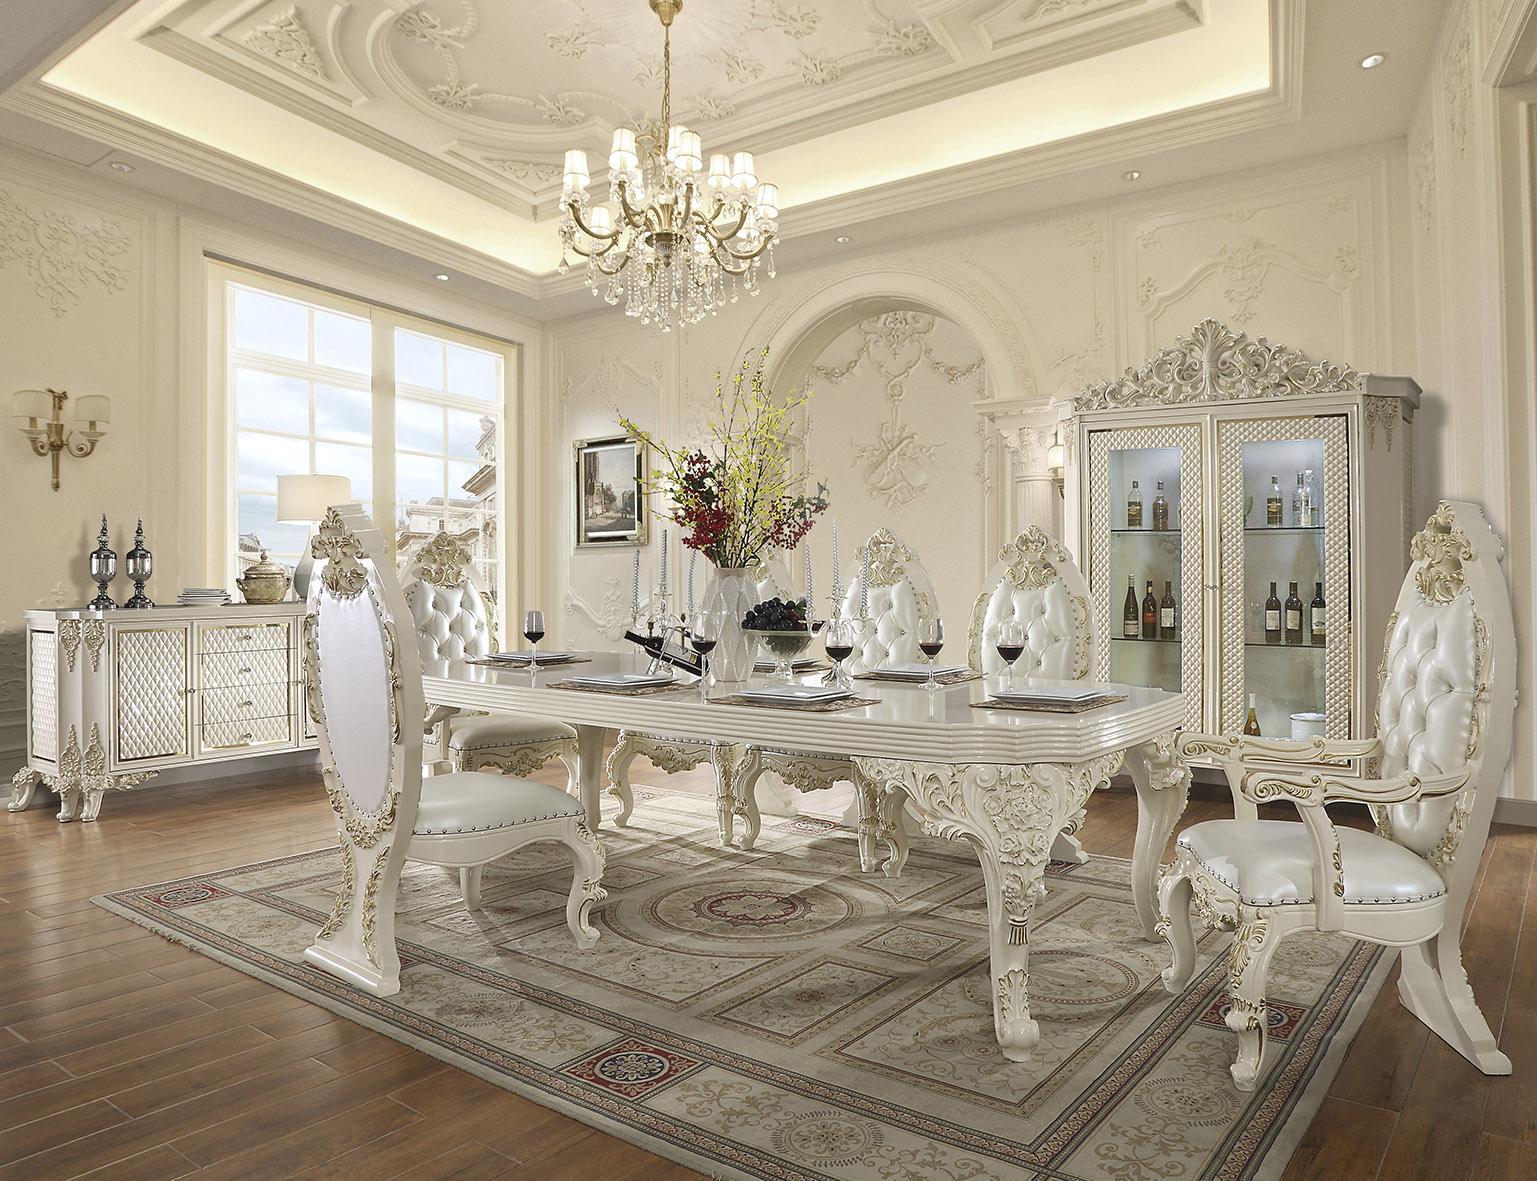 Traditional Dining Table Set HD-8091 HD-DT8091-7PC in Antique White, Gold Leather